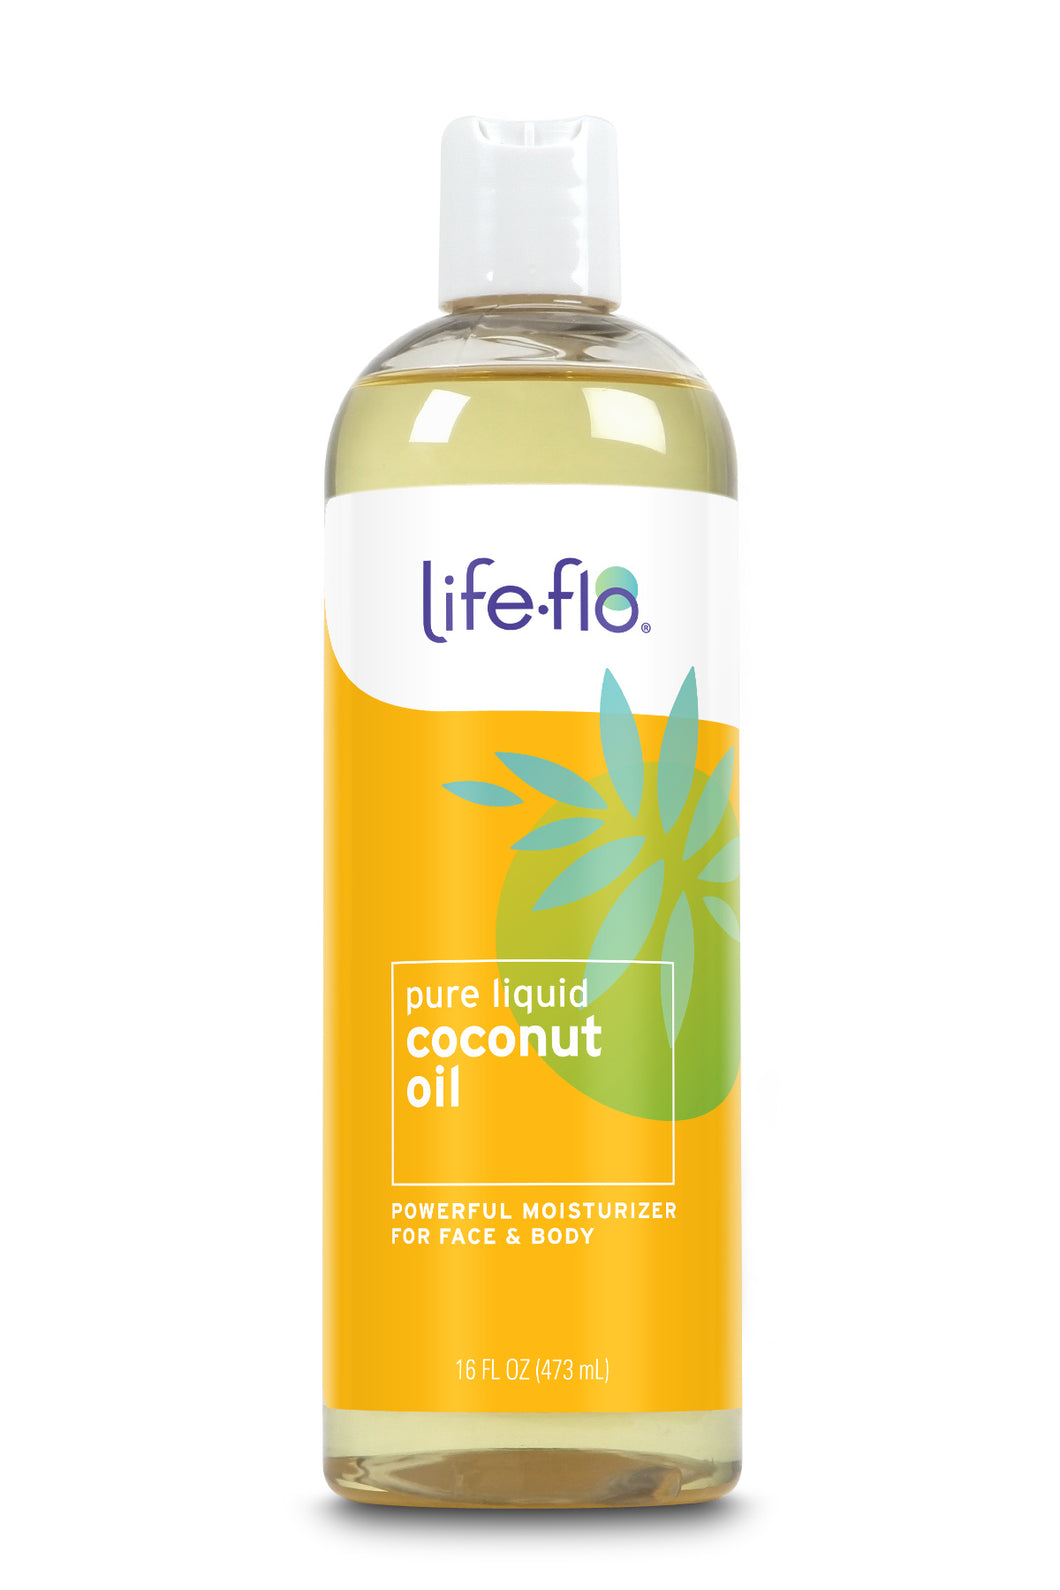 Coconut Oil, Fractionated